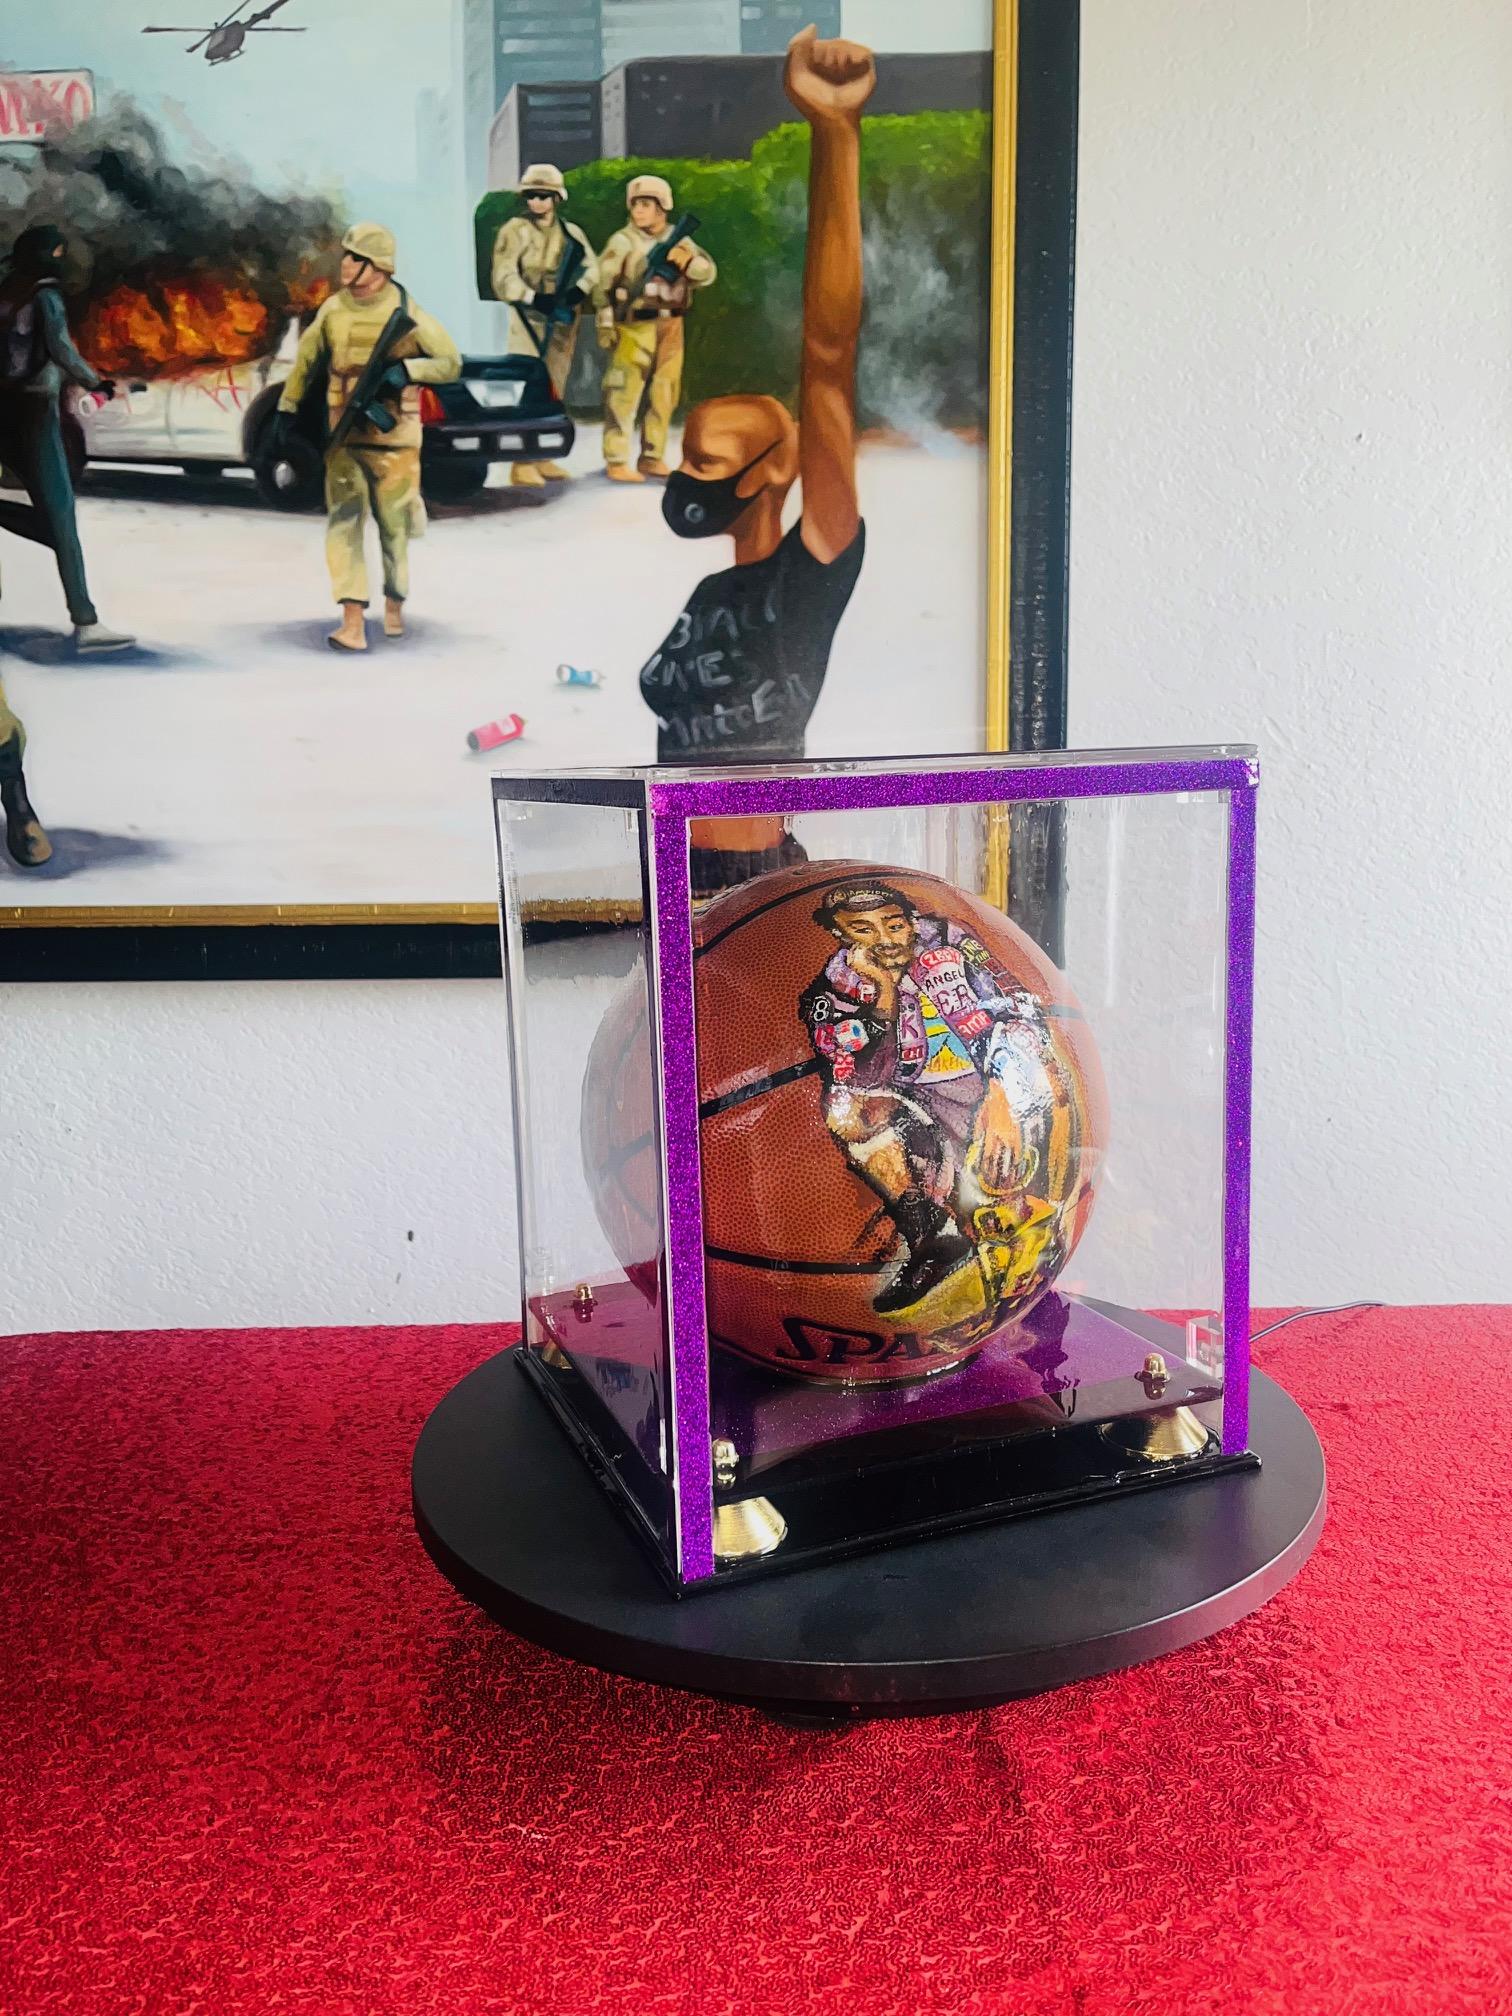                  **ANNUAL SUPER SALE TIL JUNE 15th ONLY**
*This Price Won't Be Repeated Again This Year - Take Advantage Of It*

'Kobe Bryant Super Basketball' is THE one of a kind original creation in the memorabilia collectors world.

From the